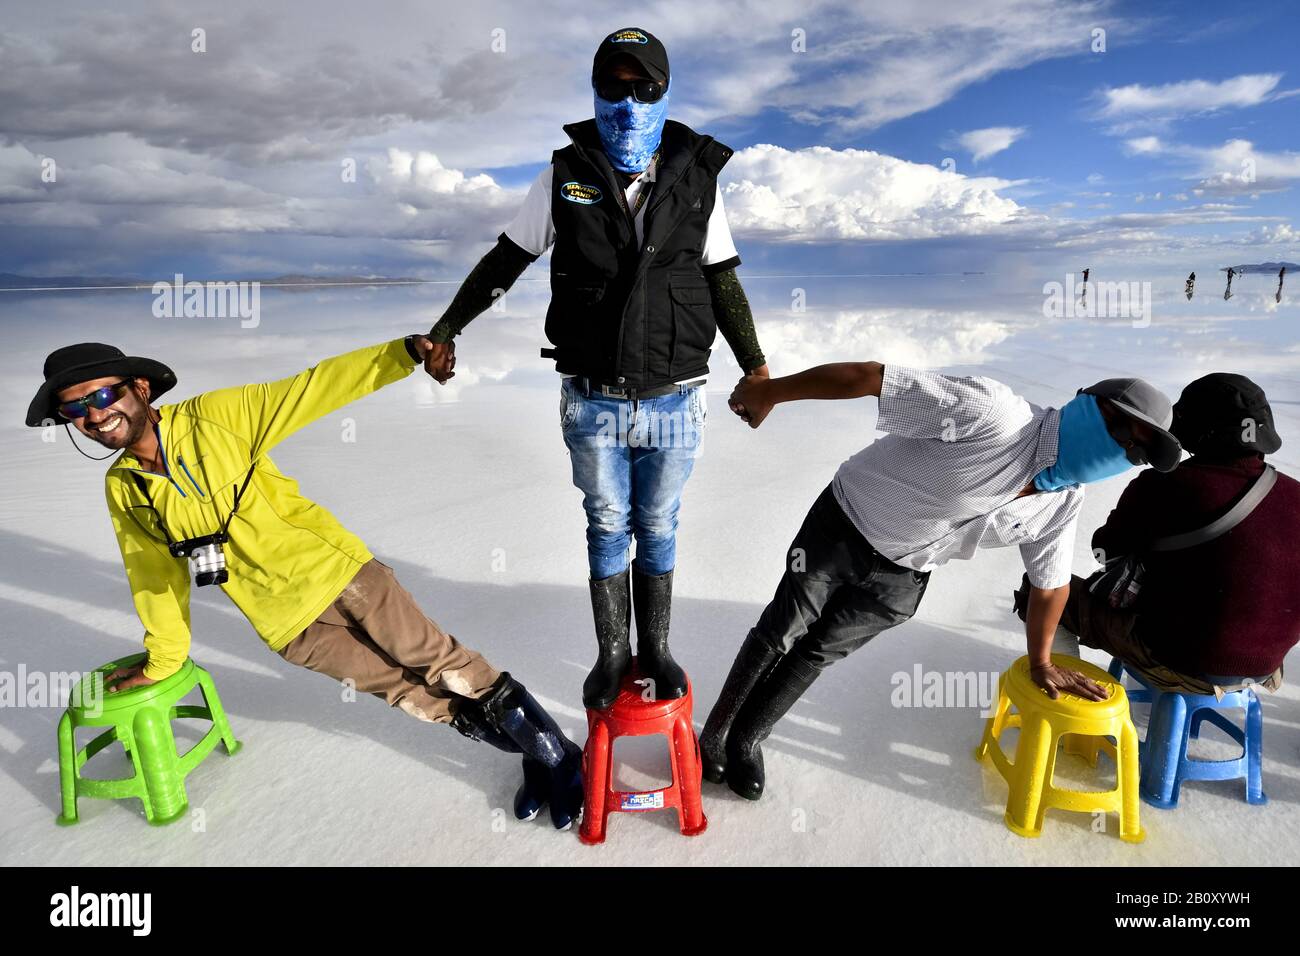 Potosi, Bolivia. 13th Feb, 2020. Bolivian Salar de Uyuni is the world's largest salt flat, and one of the top's bolivian touristic atraction, with 10,582 square kilometers (4,086 sq mi). It is in the province of PotosÃ- in southwest Bolivia, near the crest of the Andes at an elevation of 3,656 meters (11,995 ft) above sea level.The crust serves as a source of salt and covers a pool of brine, which is exceptionally rich in lithium. It contains approximatively 50% to 70% of the world's known lithium reserves. However, lithium extraction in the 1980s and 1990s by foreign companies met strong o Stock Photo